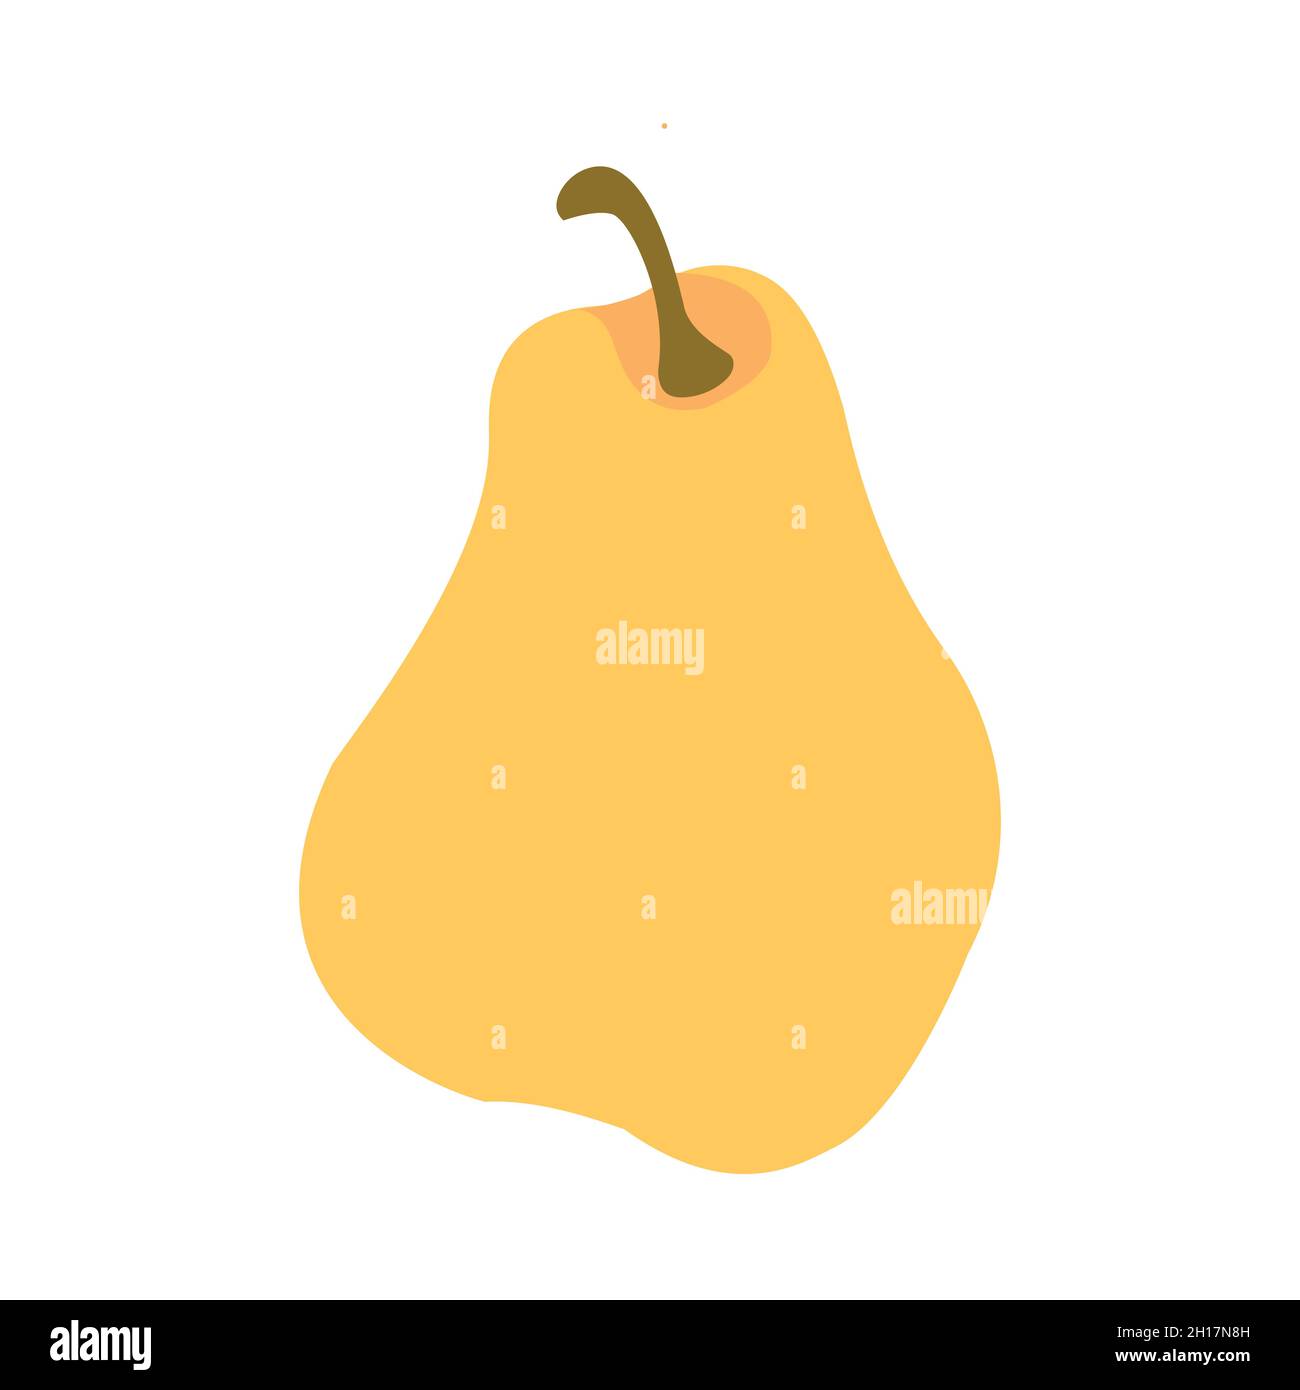 Pears in flat style design vector image Stock Vector